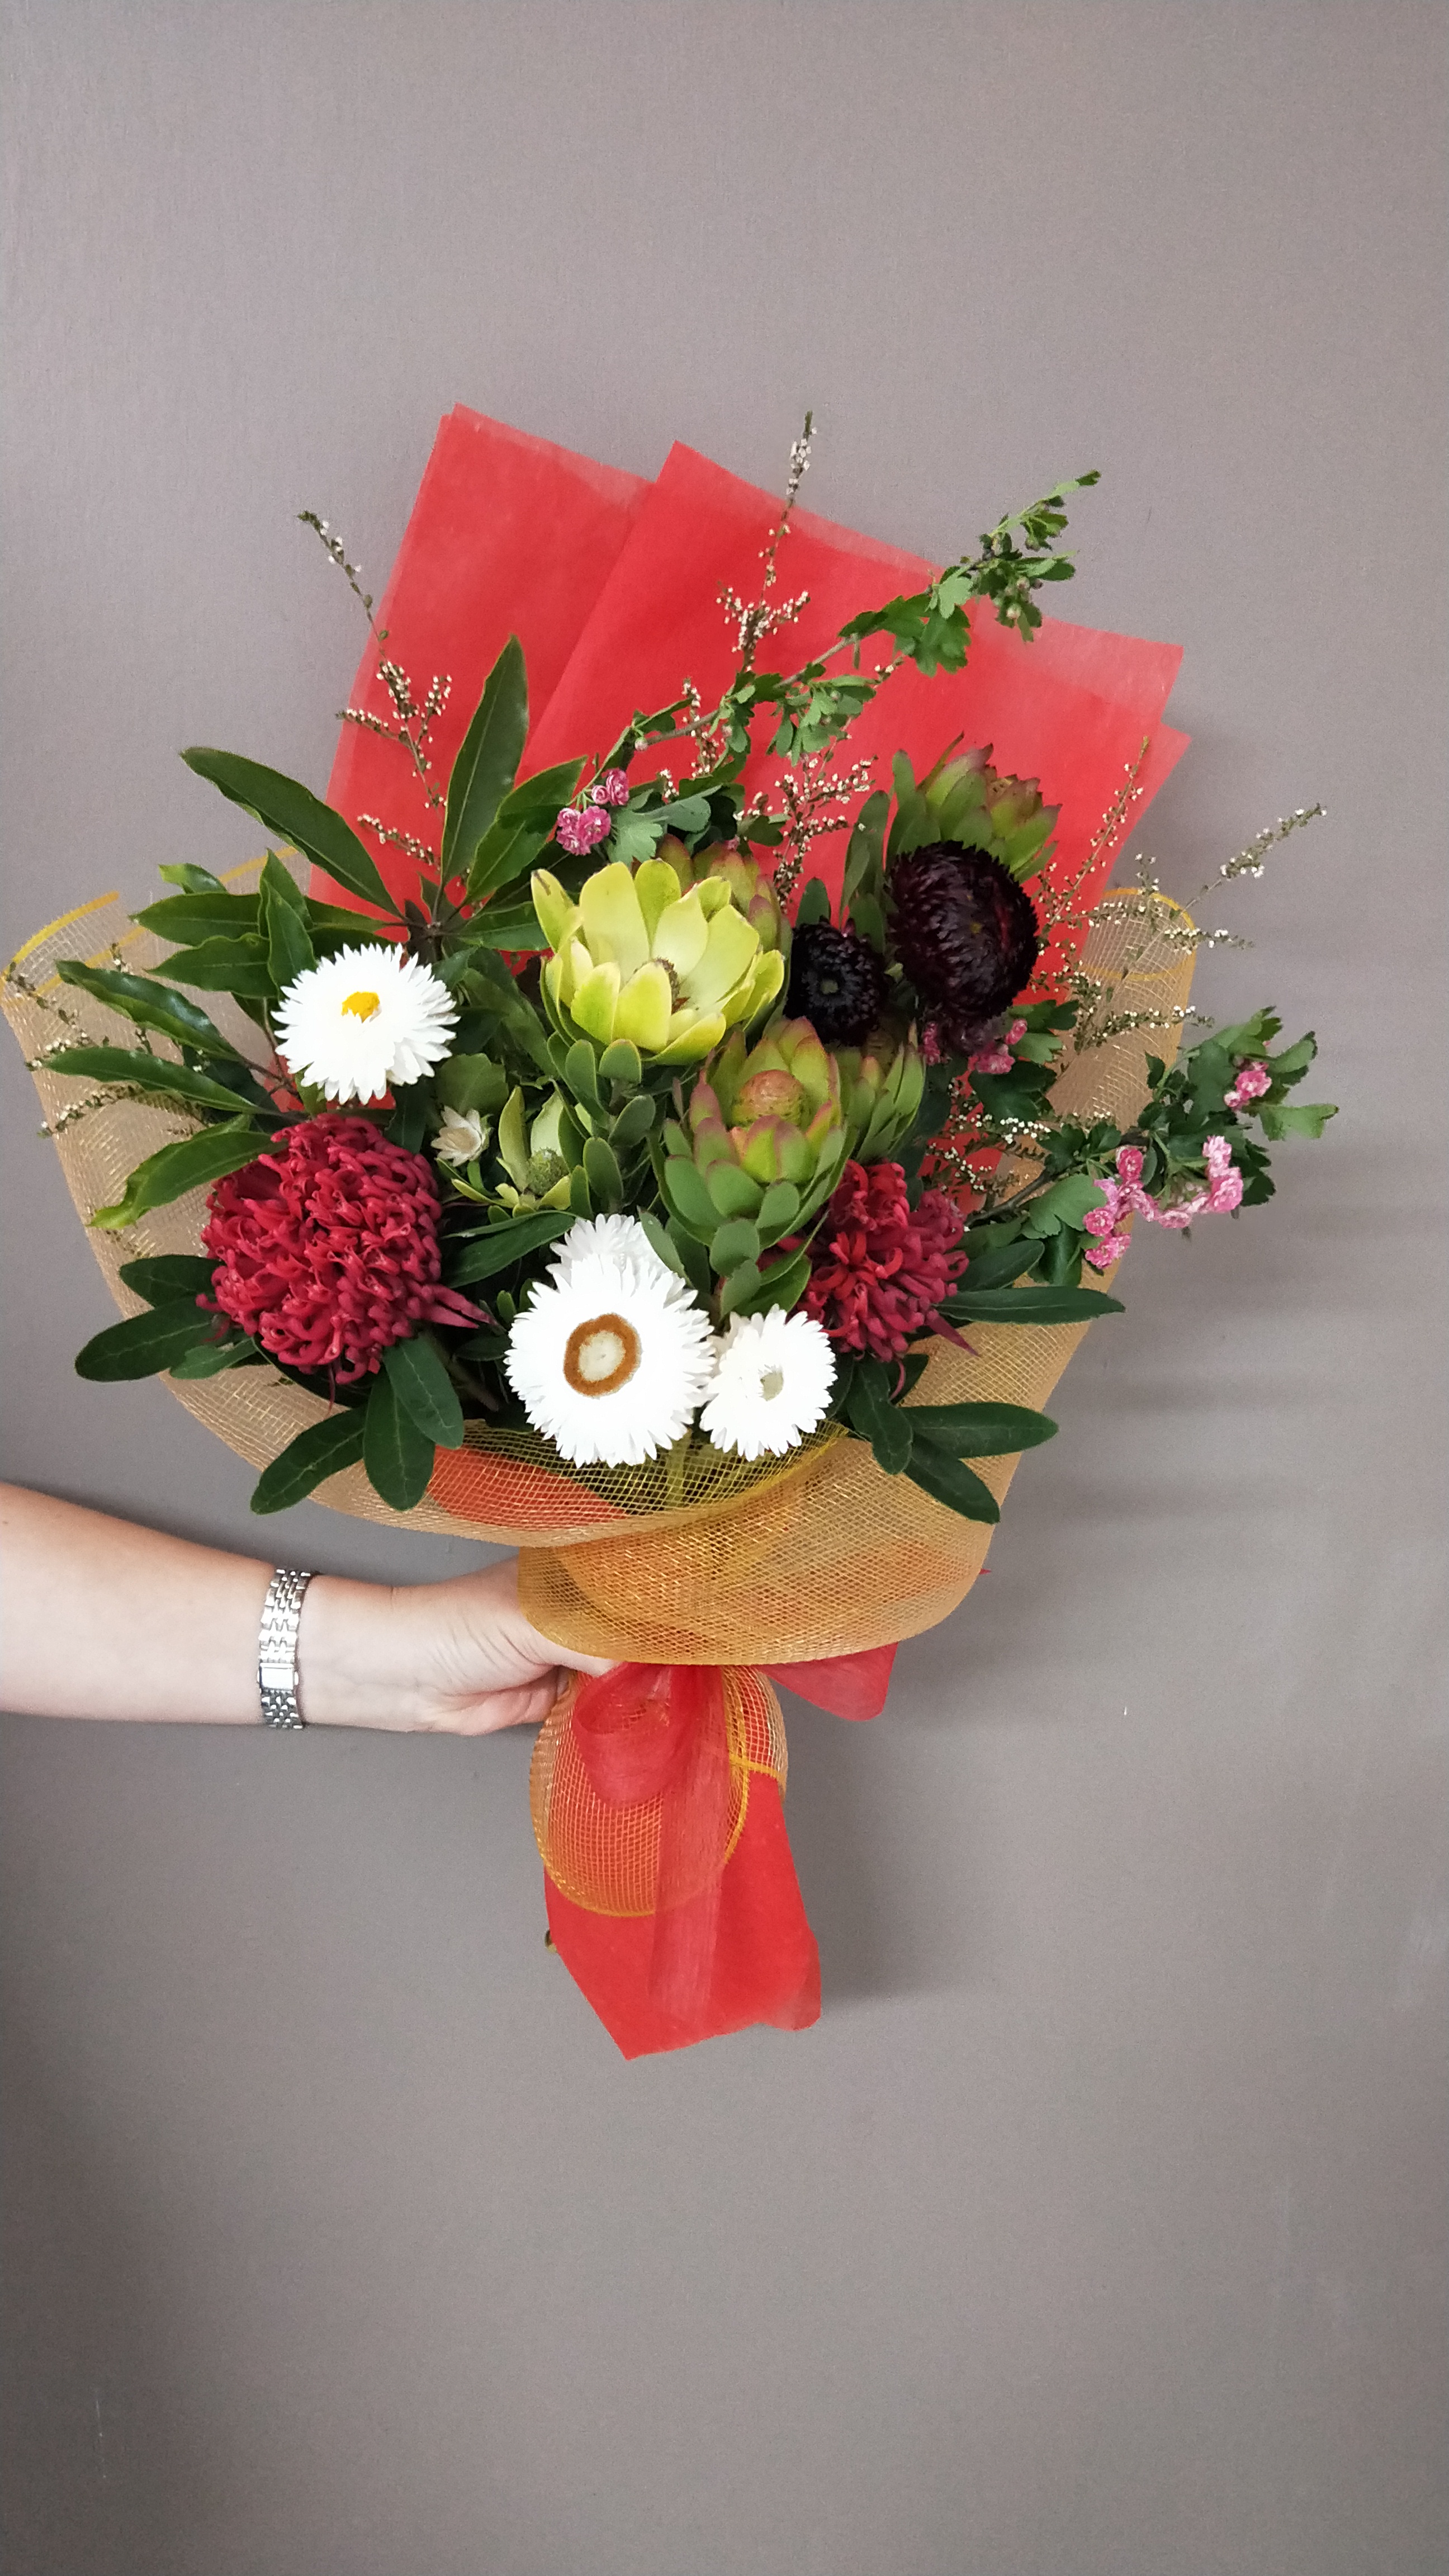 Inspiration bouquet makes the ideal gift for any occasion.